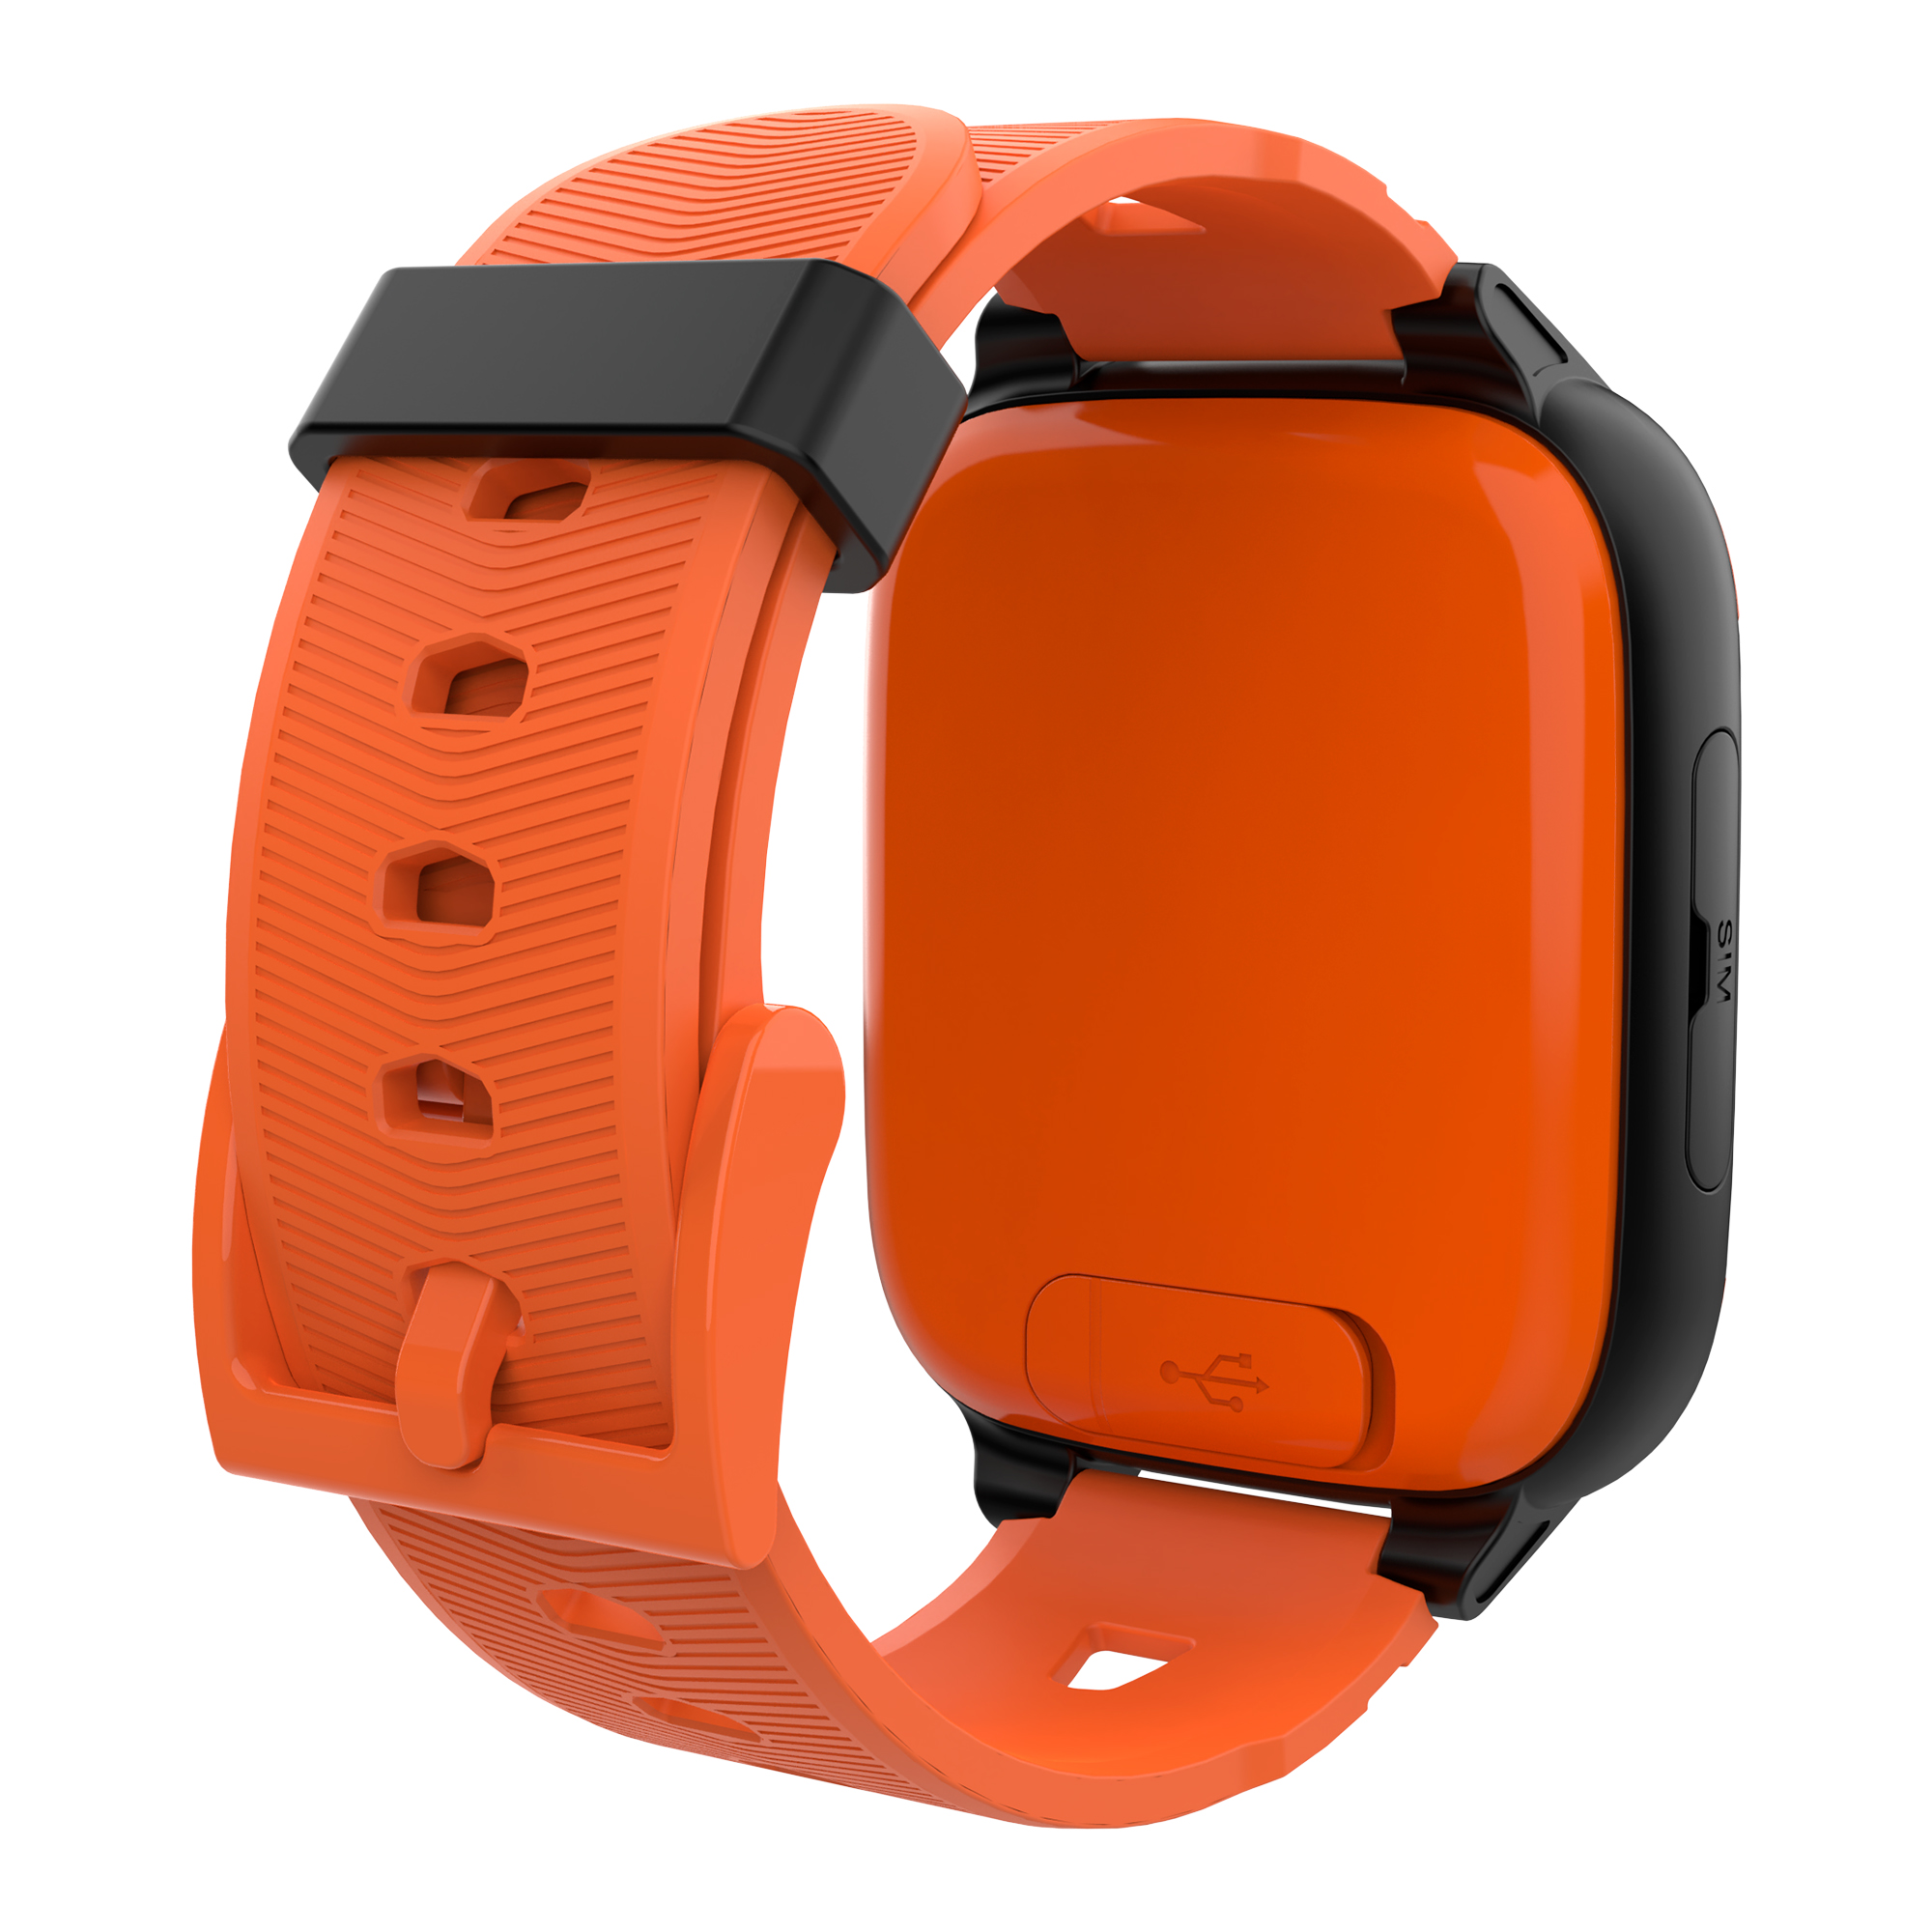 Back View: Xplora - Kids' XGO3 (GPS + Cellular) Smartwatch 42mm Calls, Messages, SOS, GPS Tracker, Camera, Step Counter, SIM Card included - Orange